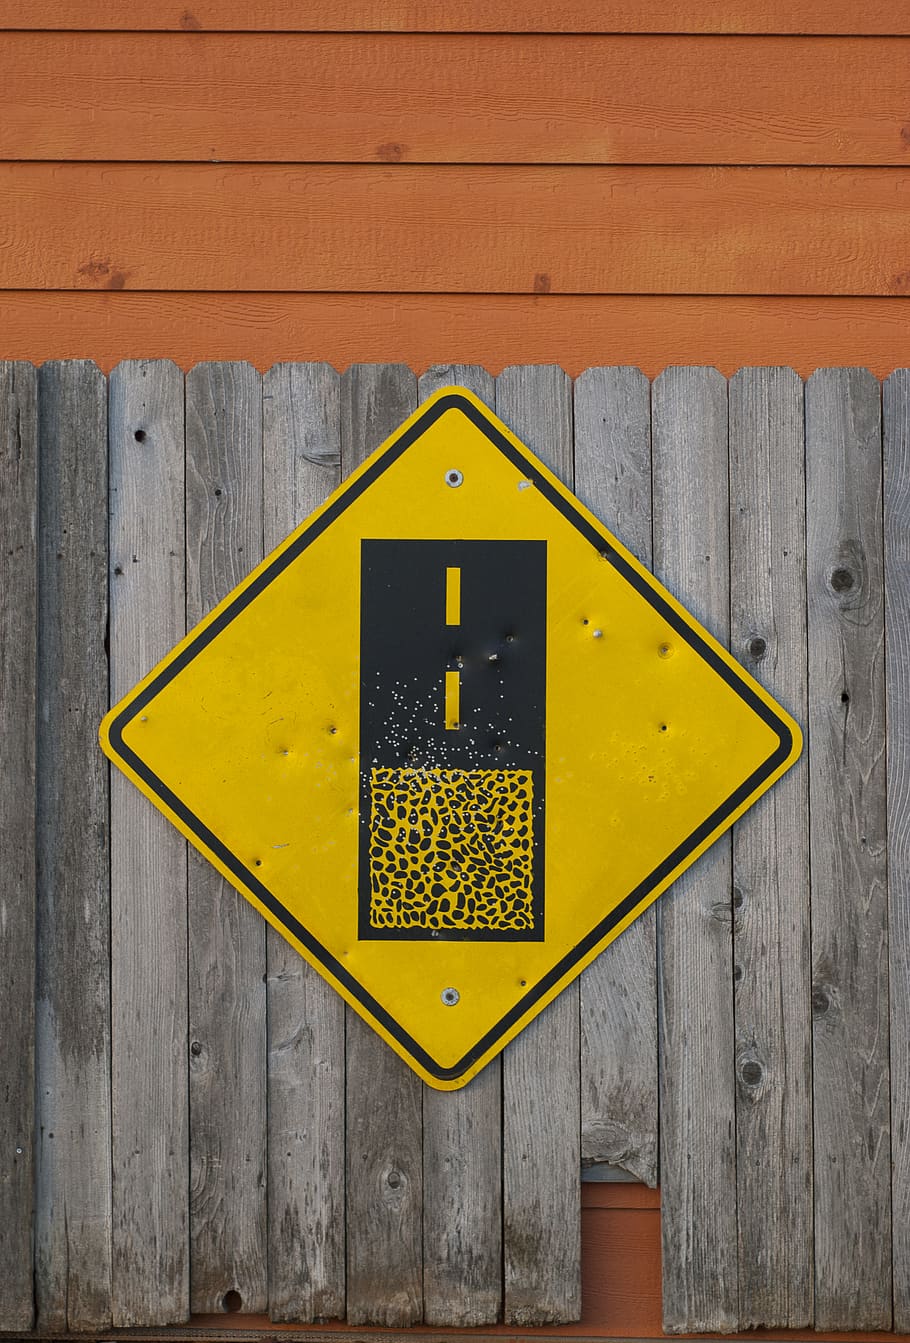 Yellow and Black Road Sign on Gray Wooden Fence, alert, attention